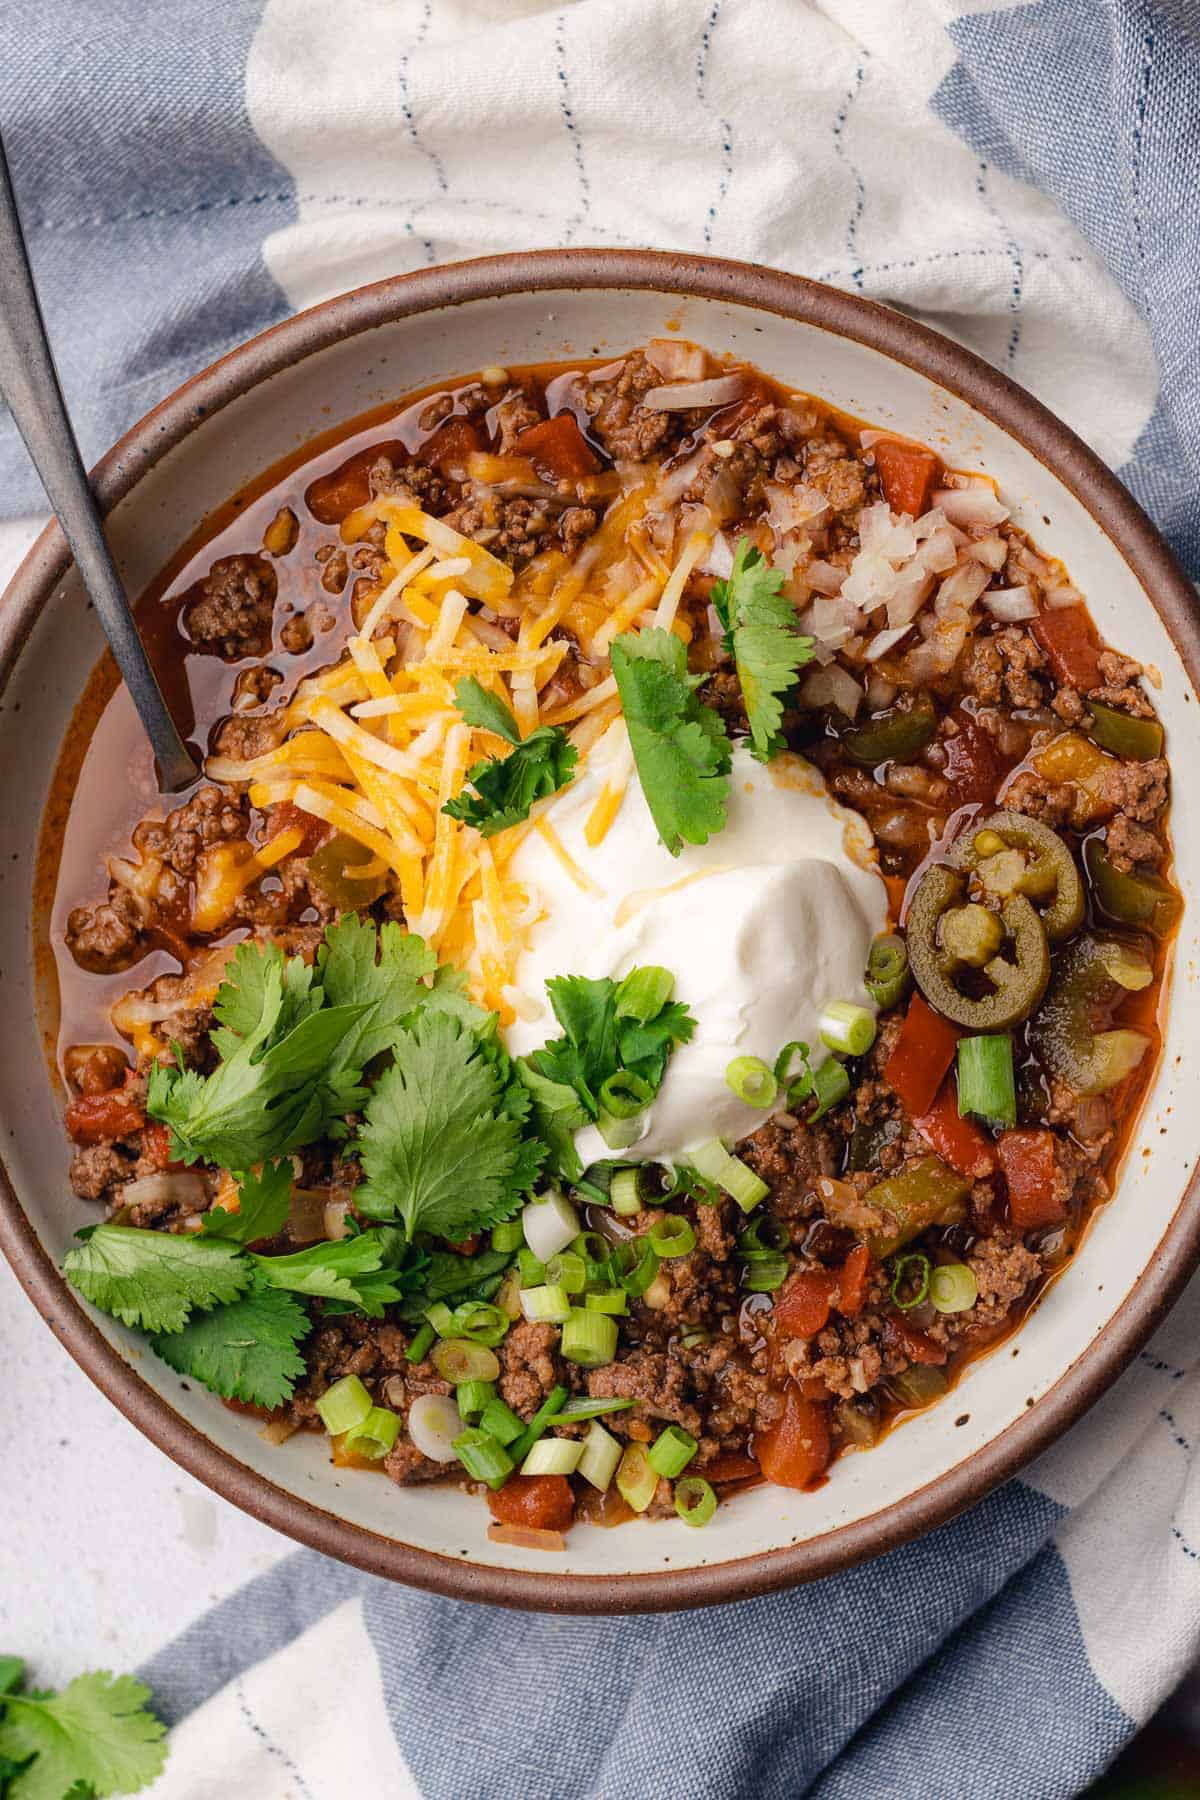 beanless chili low carb recipe with sour cream, green onions, cheese, cilantro, pickled jalapeños